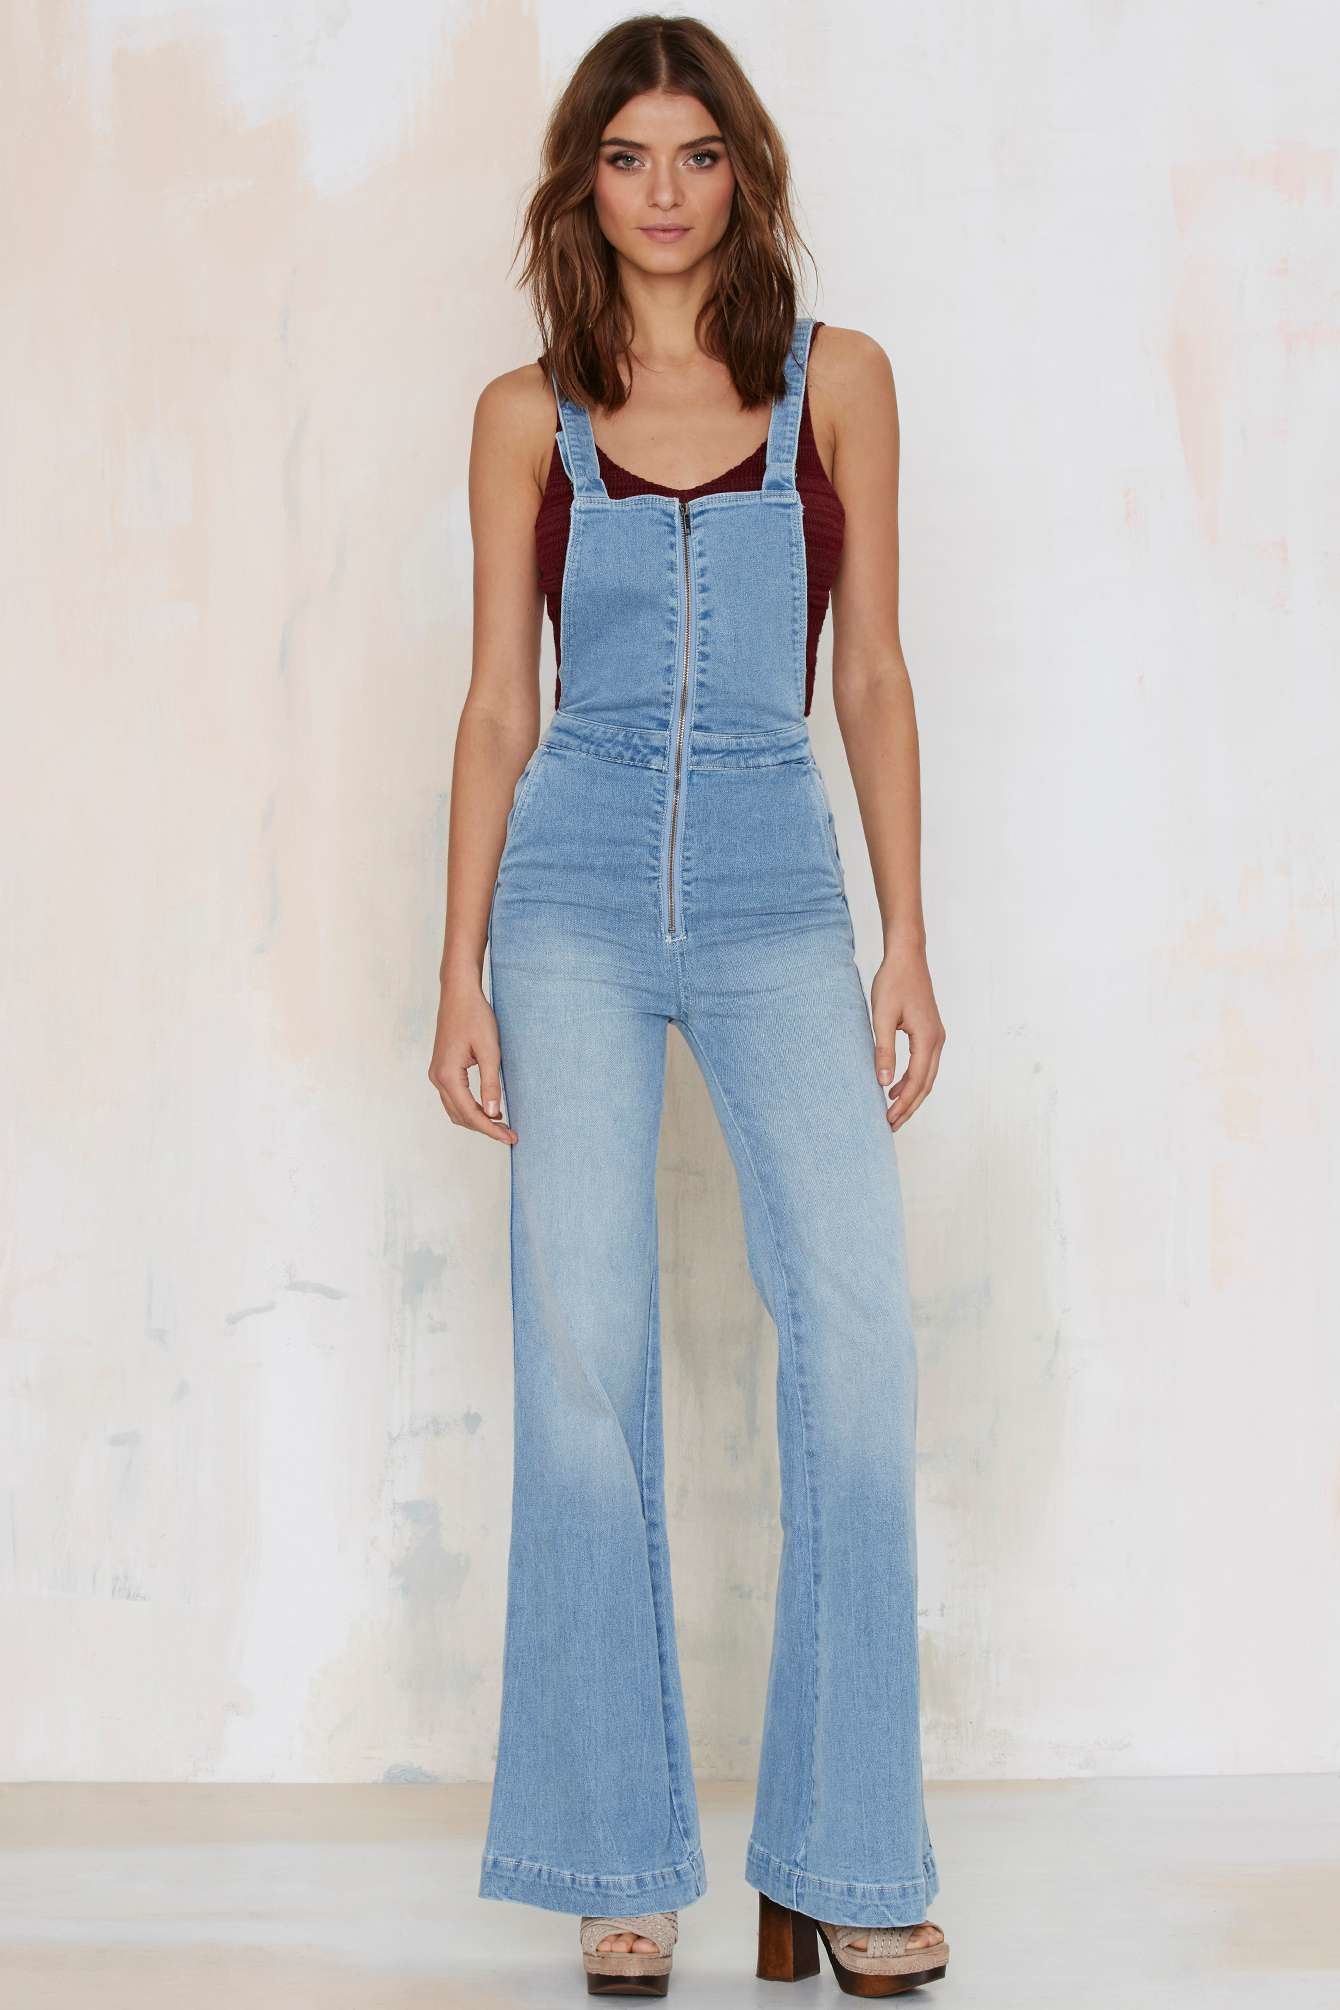 In fact advantage Pronoun Nasty Gal Rolla's East Cost Denim Flare Overalls in Blue | Lyst